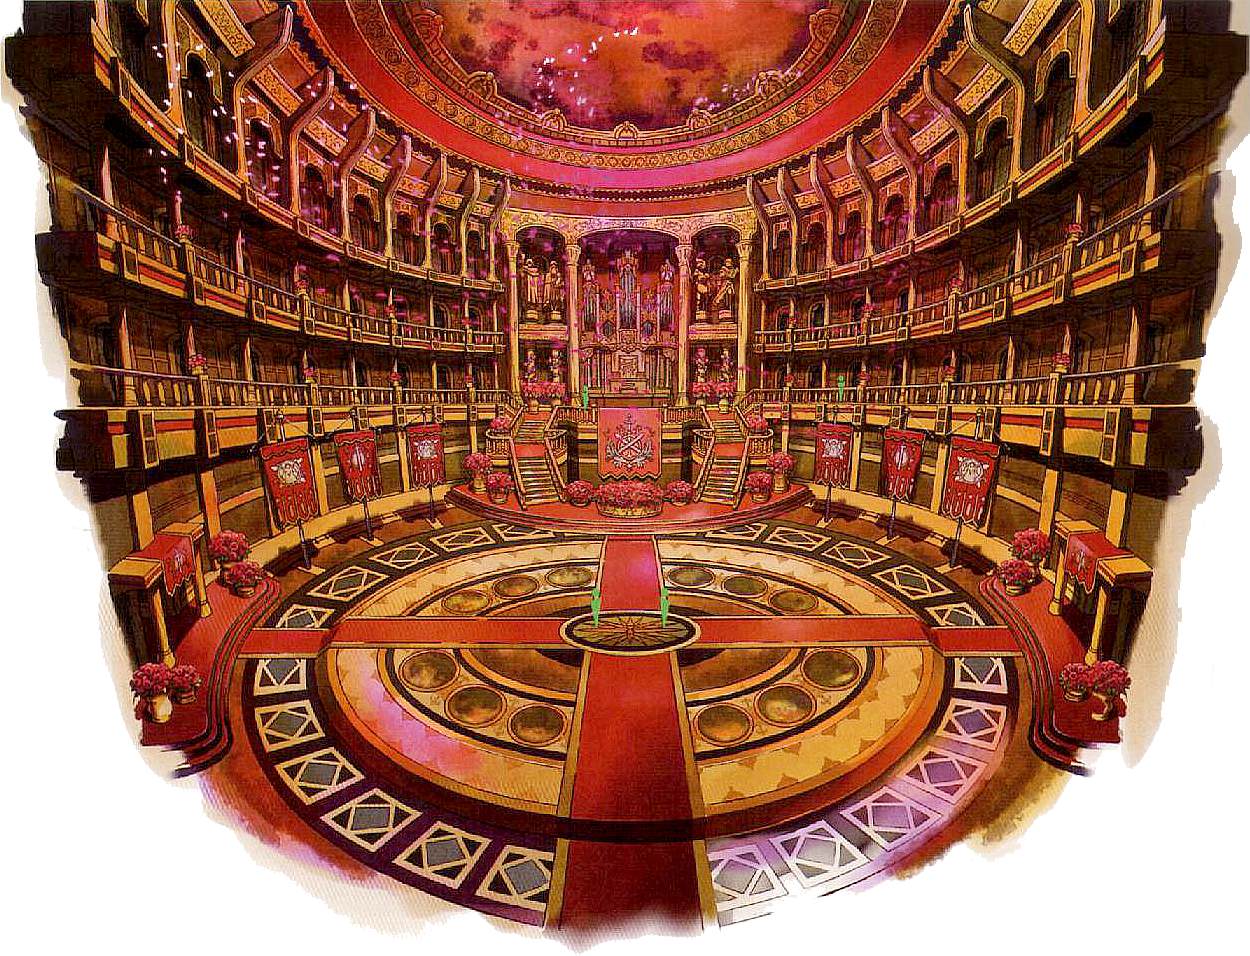 Opulent Anime Theater Interior PNG image